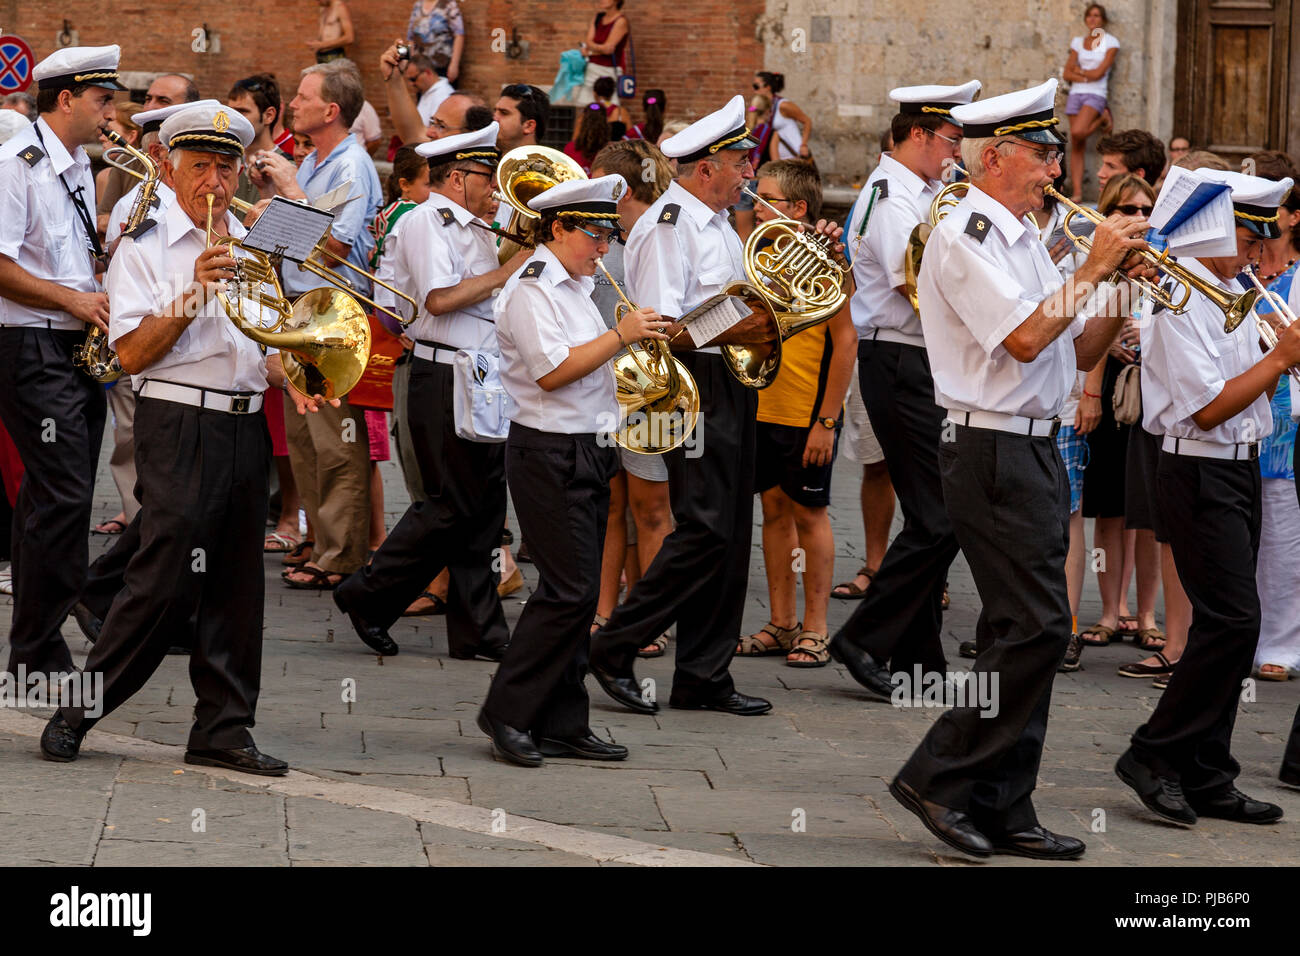 A Band Parades Through The Streets Of Siena Playing Music, The Palio di Siena, Siena, Italy Stock Photo